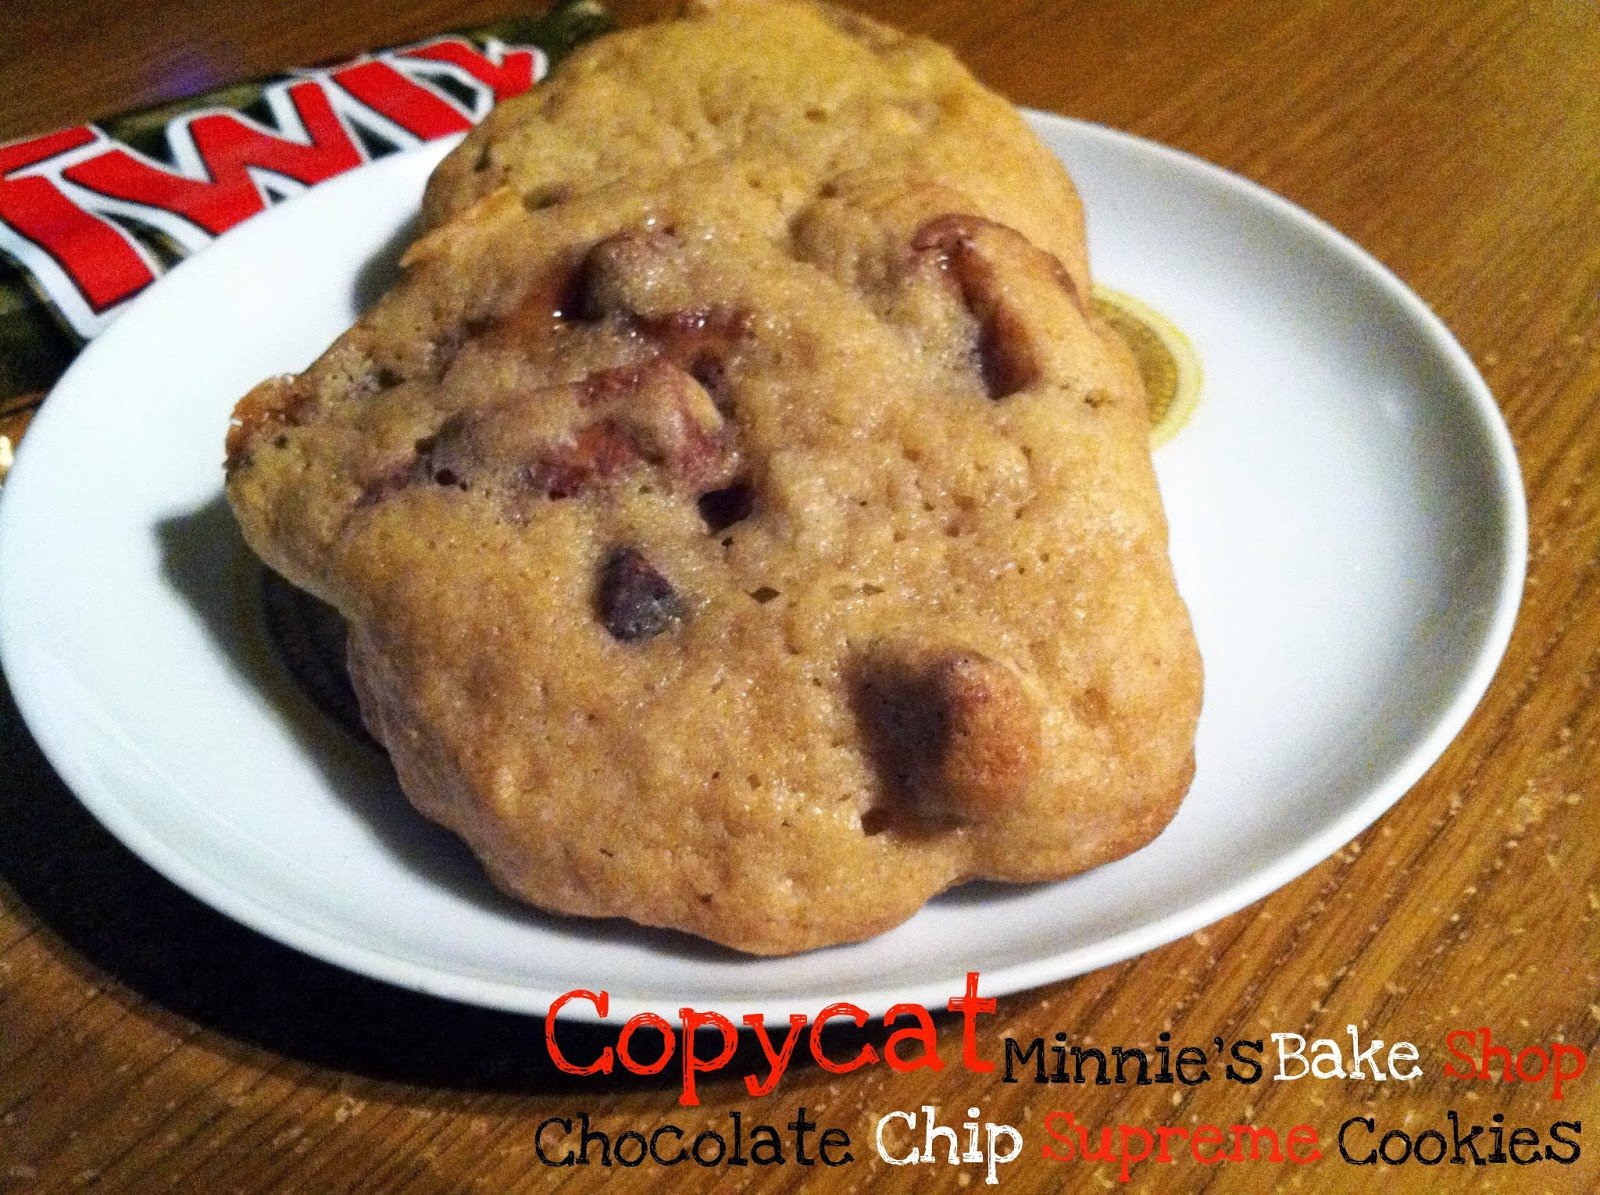 Tate'S Bake Shop Chocolate Chip Cookies
 For the Love of Cookies Copycat Minnie s Bake Shop